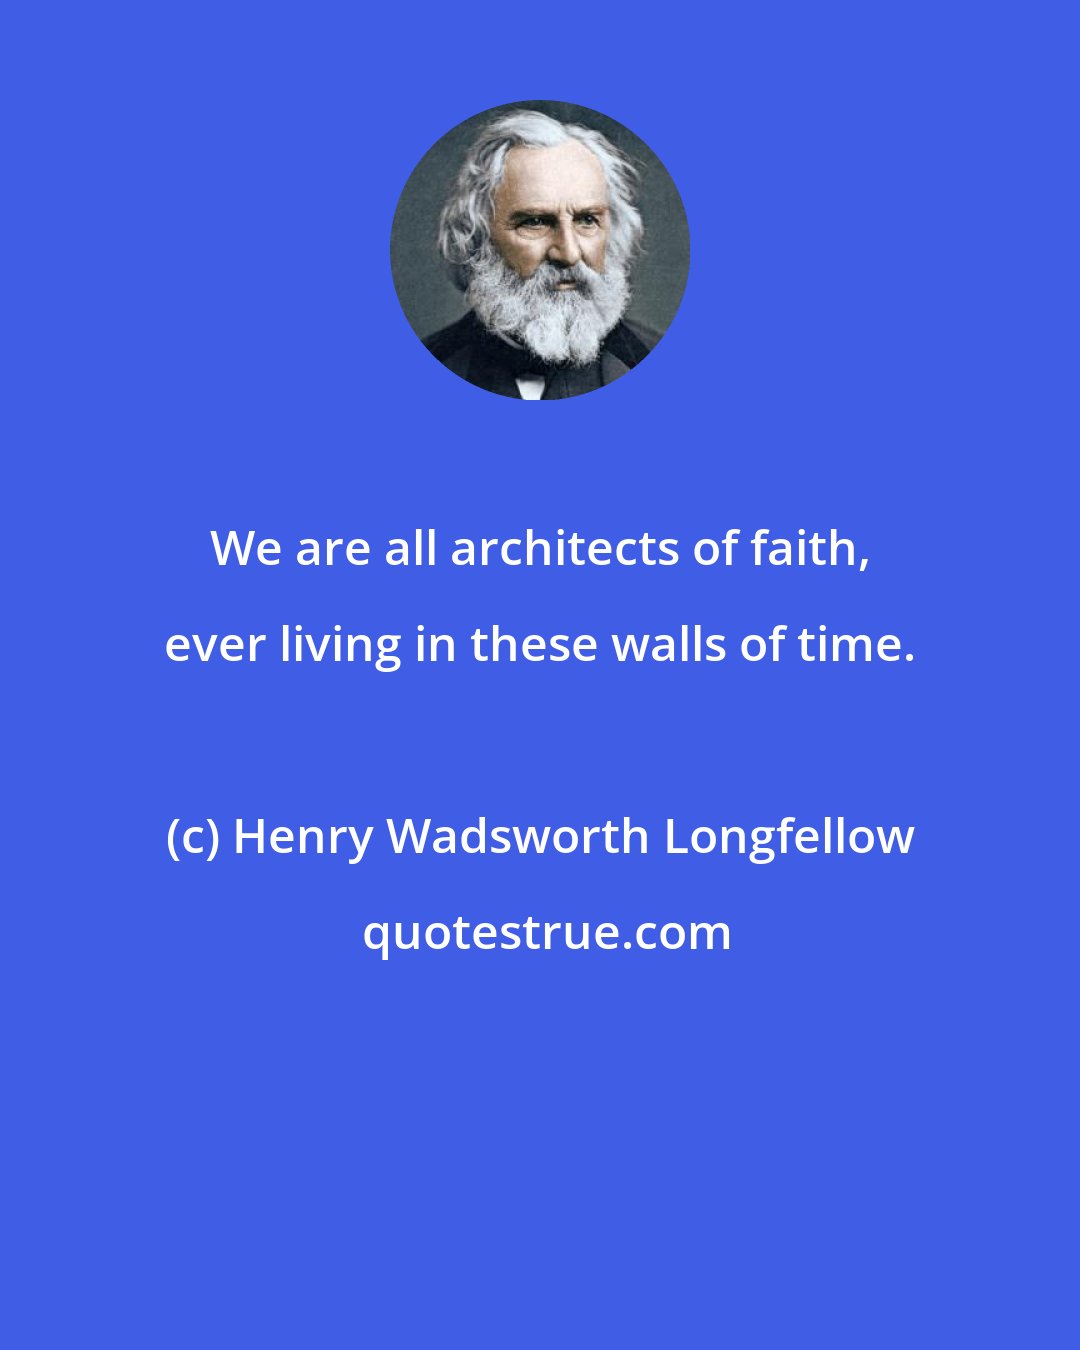 Henry Wadsworth Longfellow: We are all architects of faith, ever living in these walls of time.